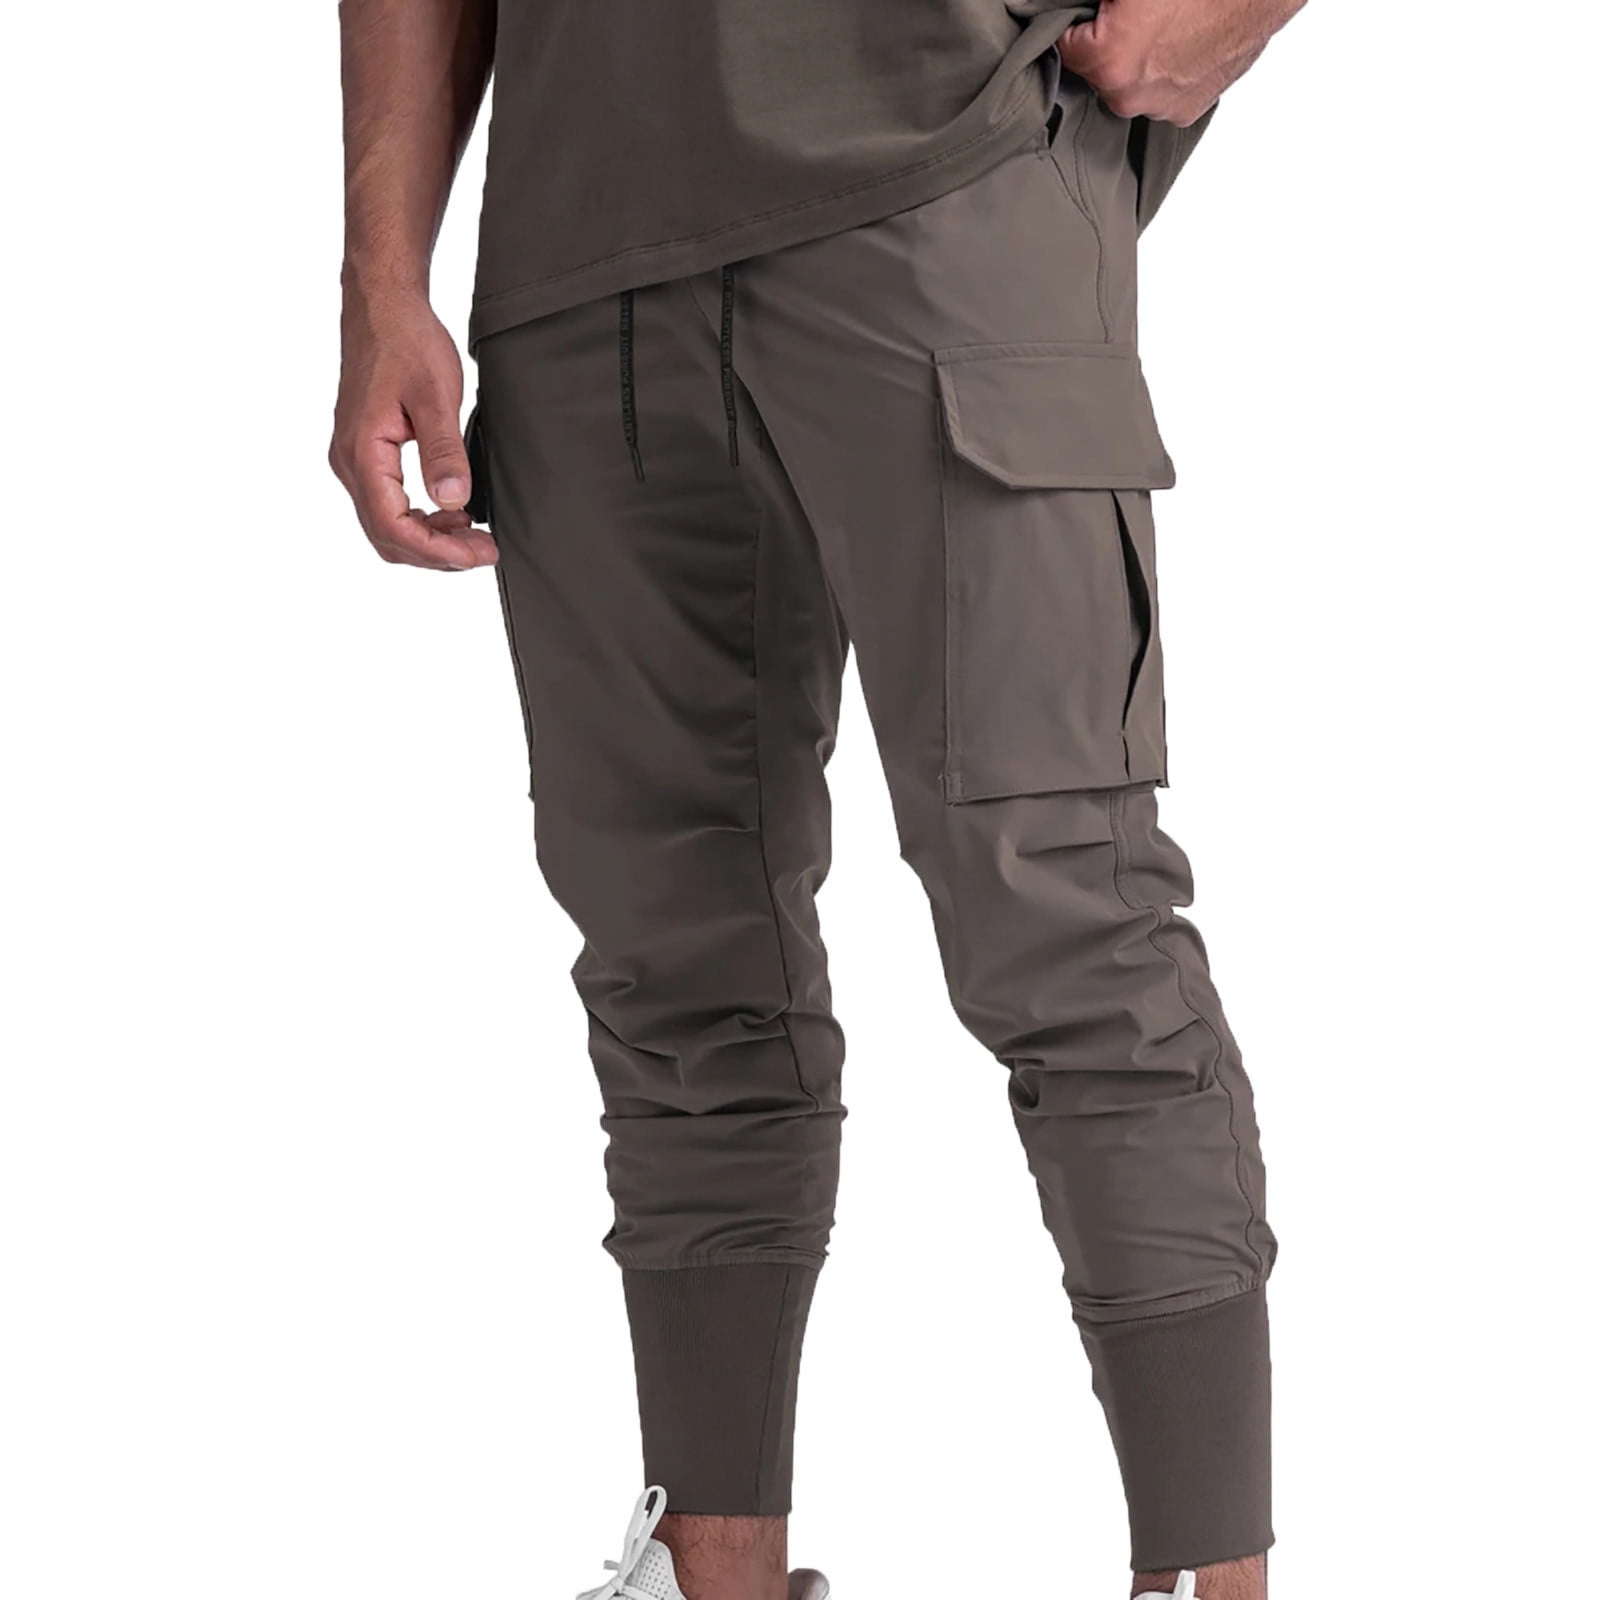 Rubber Relative Lily Hfyihgf Men's Sweatpant Camouflage Tactical Pants Waterproof Lightweight  Ripstop Outdoor Hiking Tapered Cargo Pants(Army Green,XL) - Walmart.com